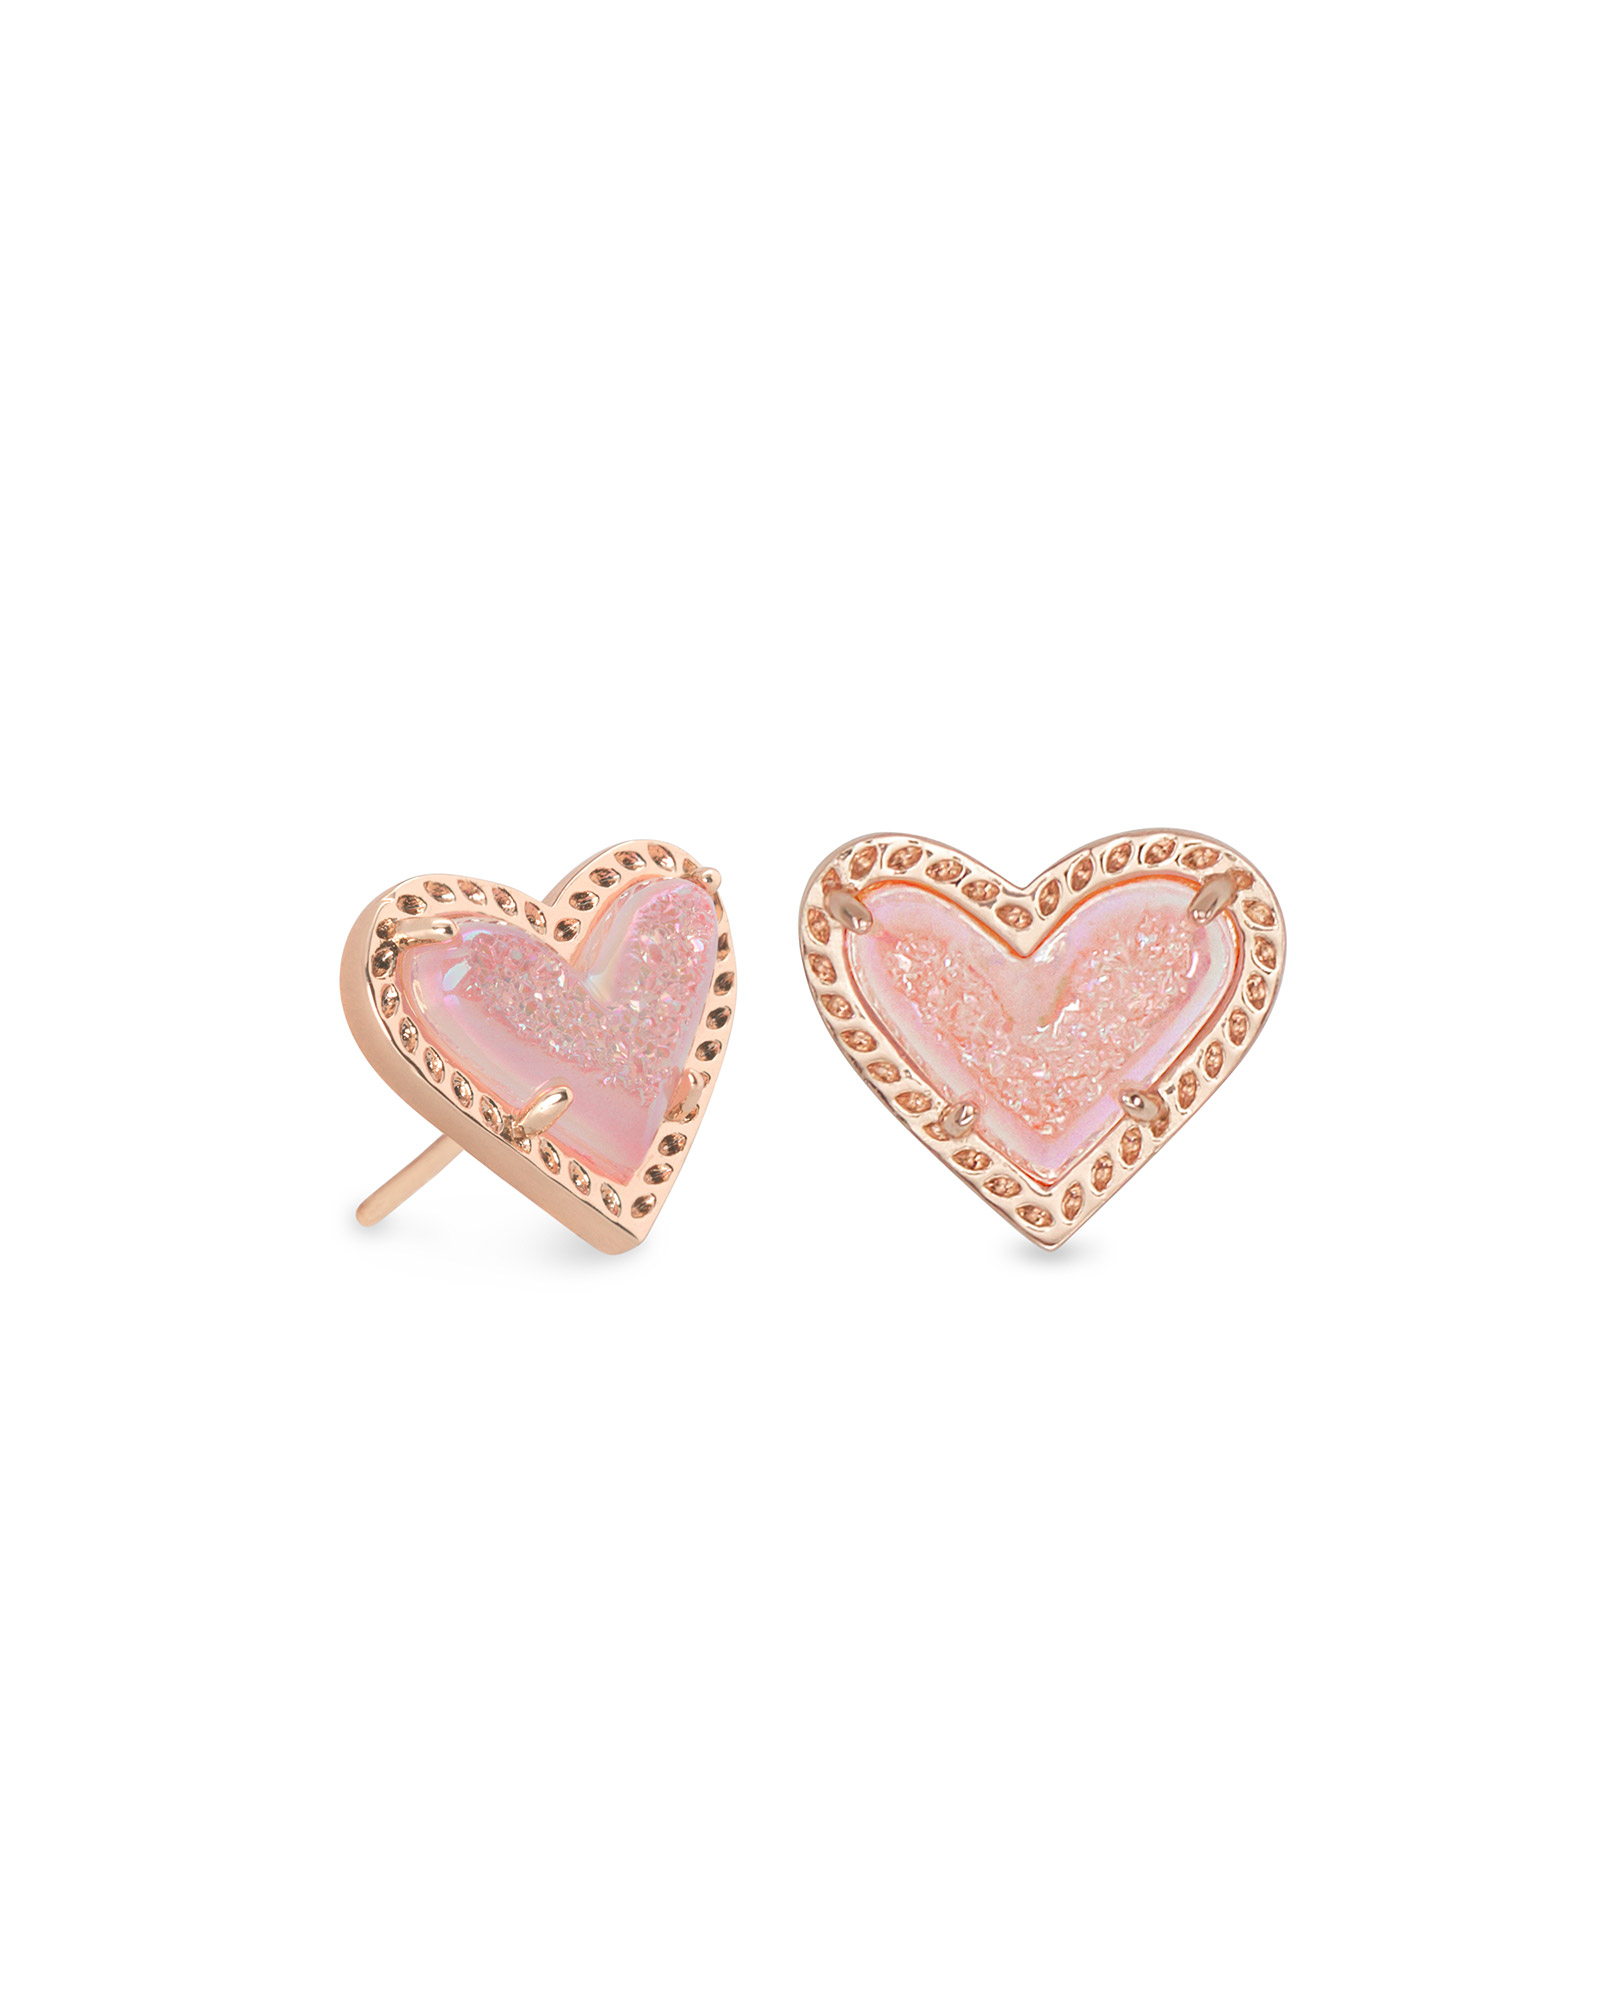 KENDRA SCOTT ARI COLLECTION 14K ROSE GOLD PLATED BRASS FASHION HEART STUD EARRINGS WITH PINK DRUSY